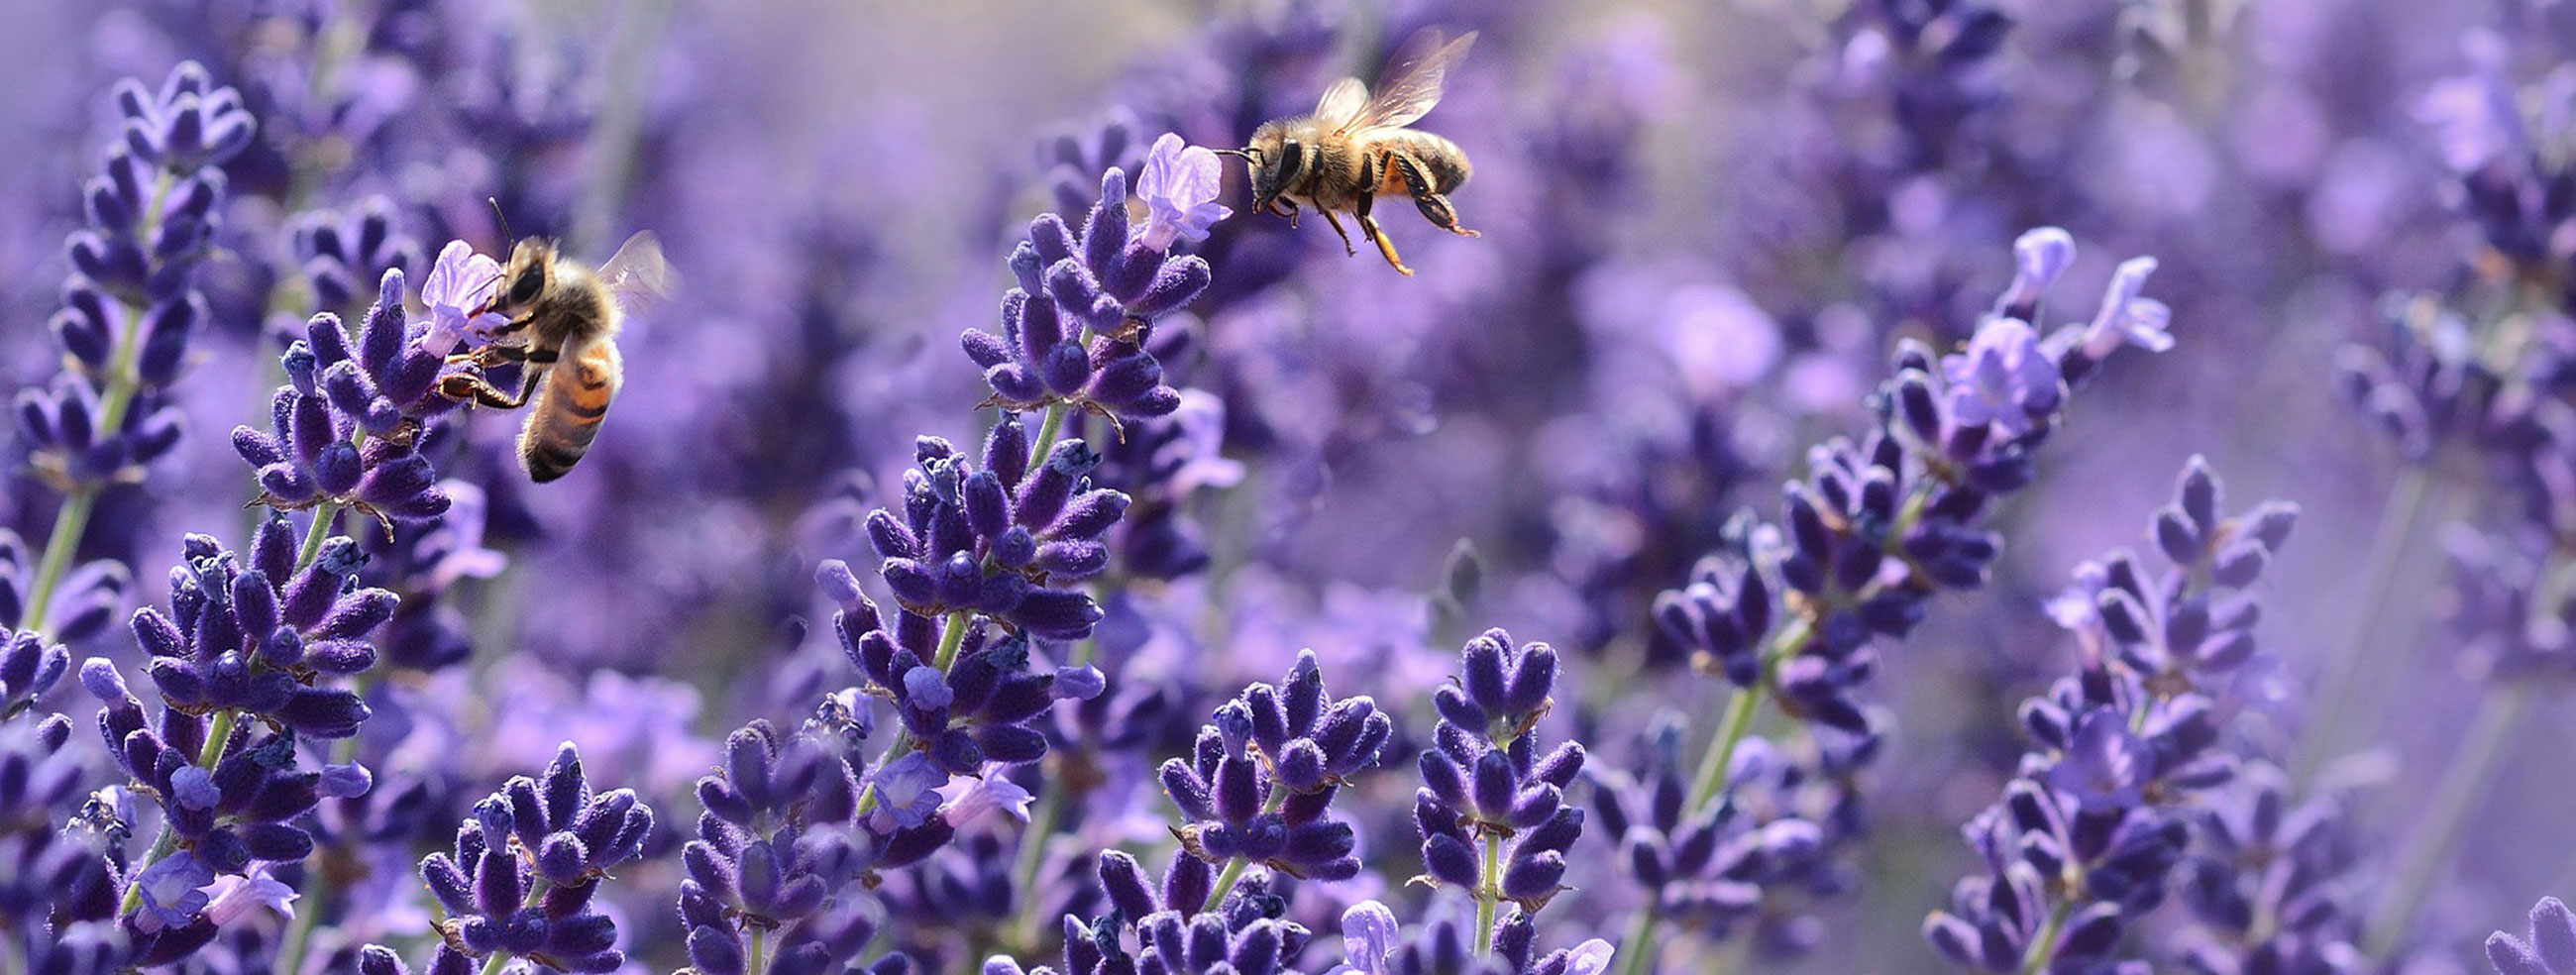 Bees on lavender